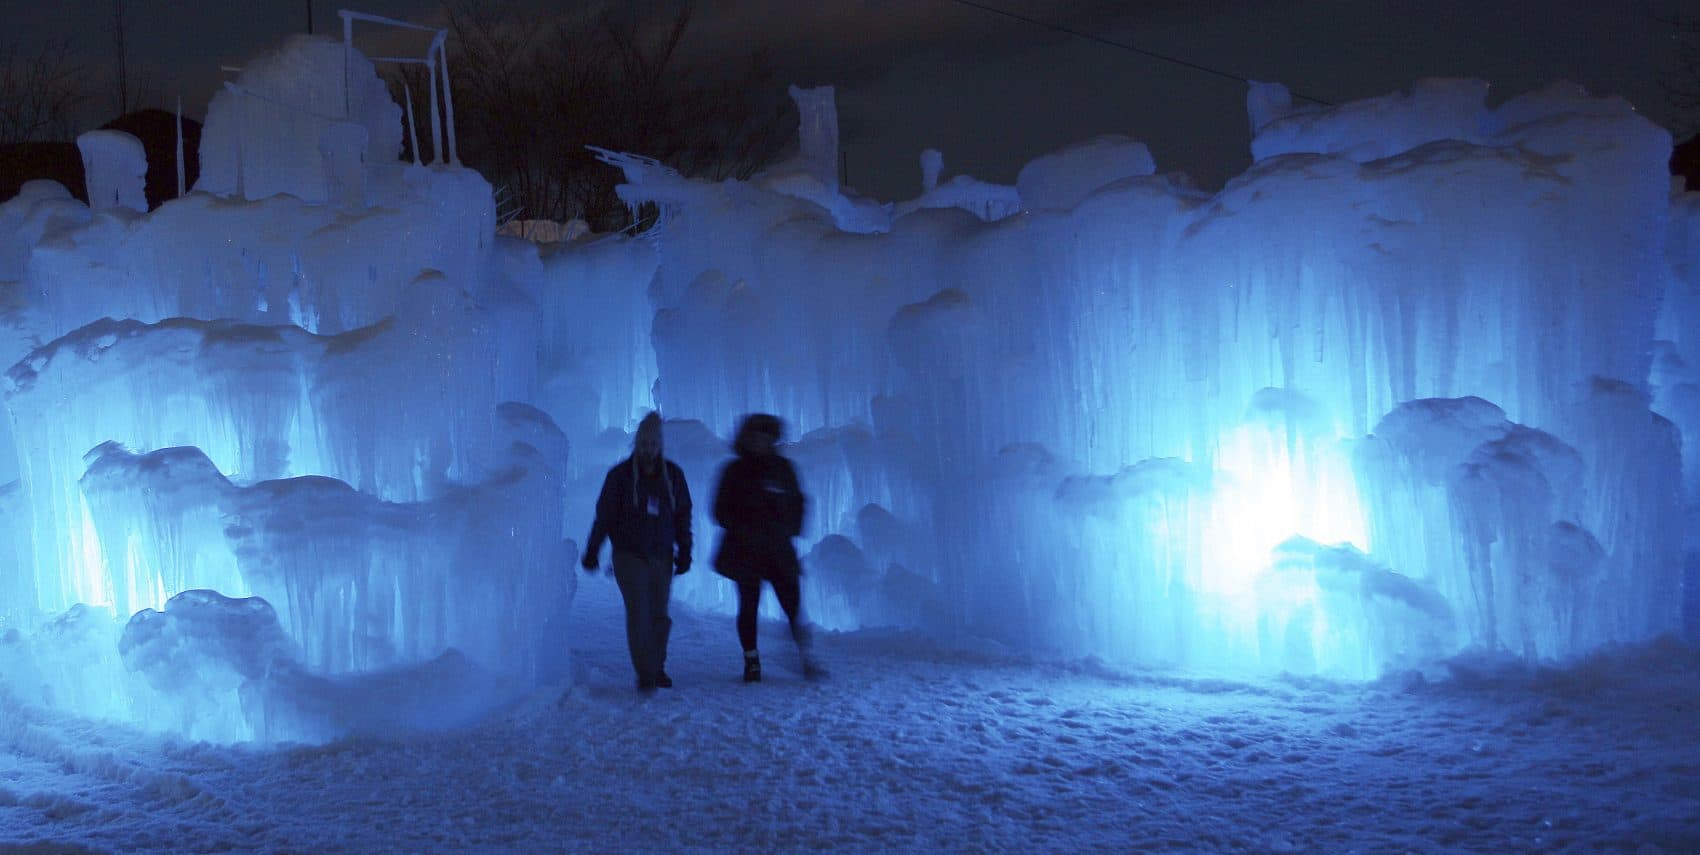 People tour an ice castle in Lincoln, New Hampshire in 2014. (Jim Cole/AP)